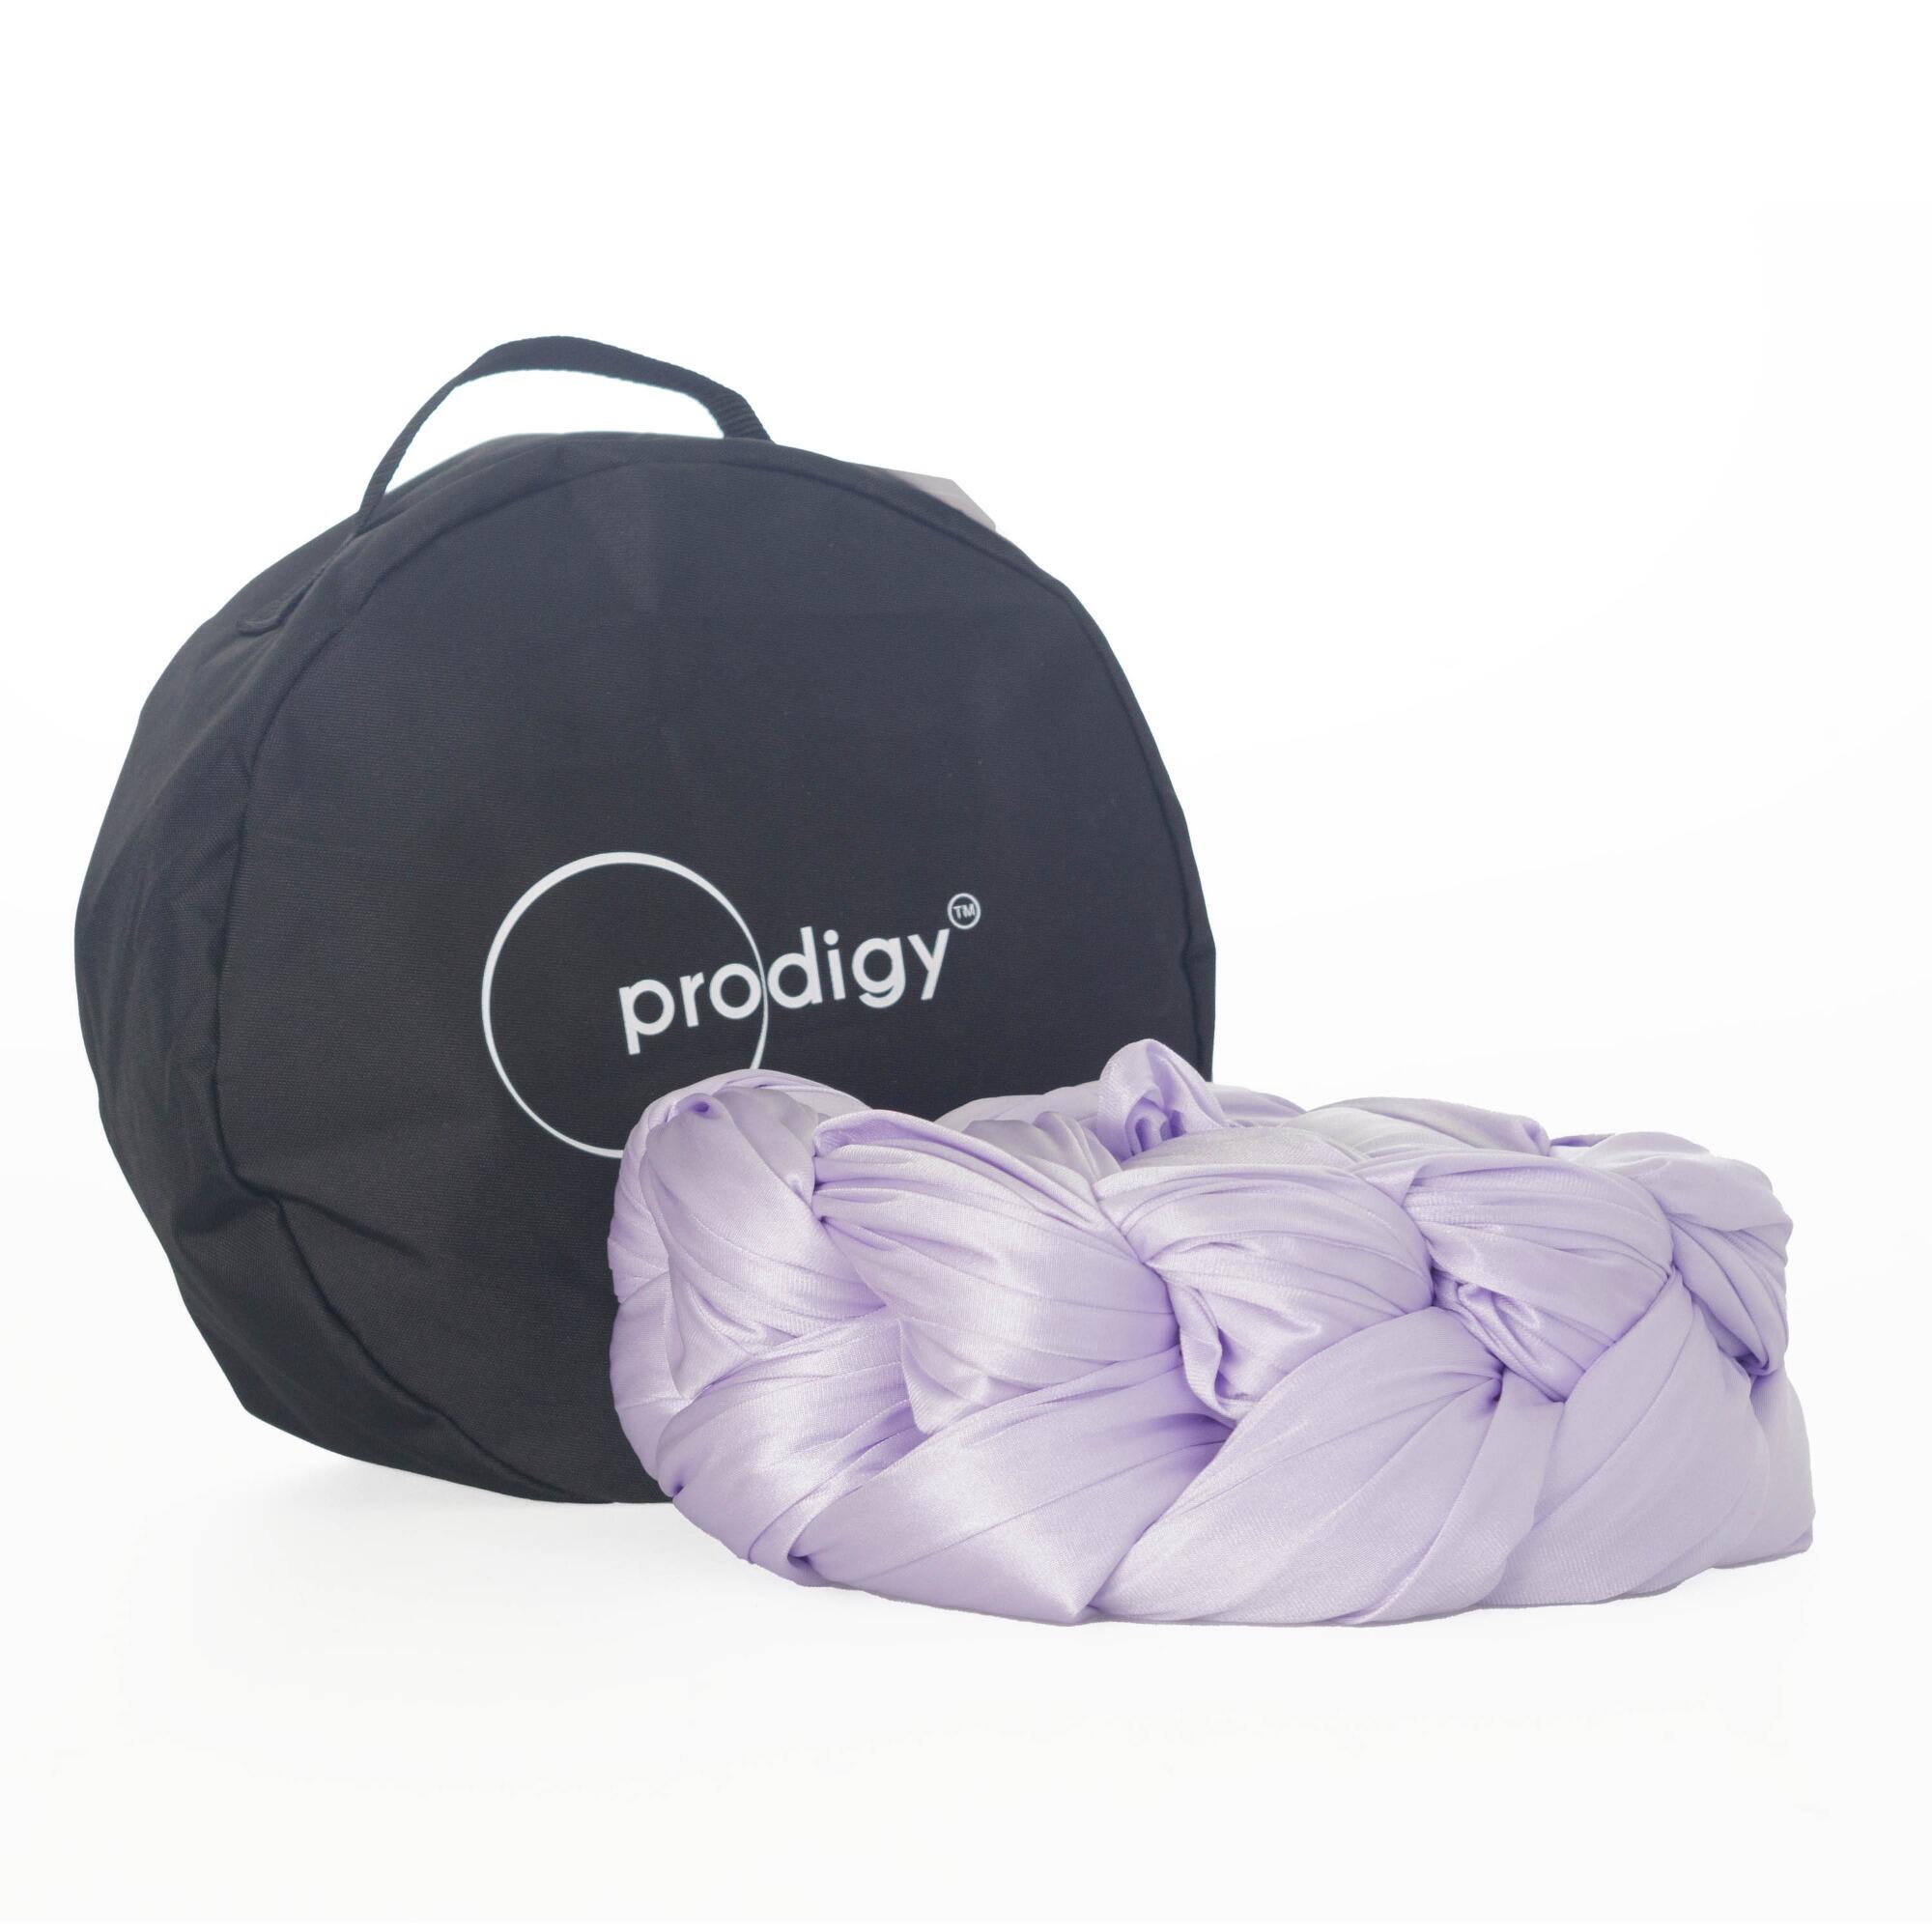 PRODIGY 6m Prodigy Aerial Fabric for Hammocks -Lilac with round Prodigy bag